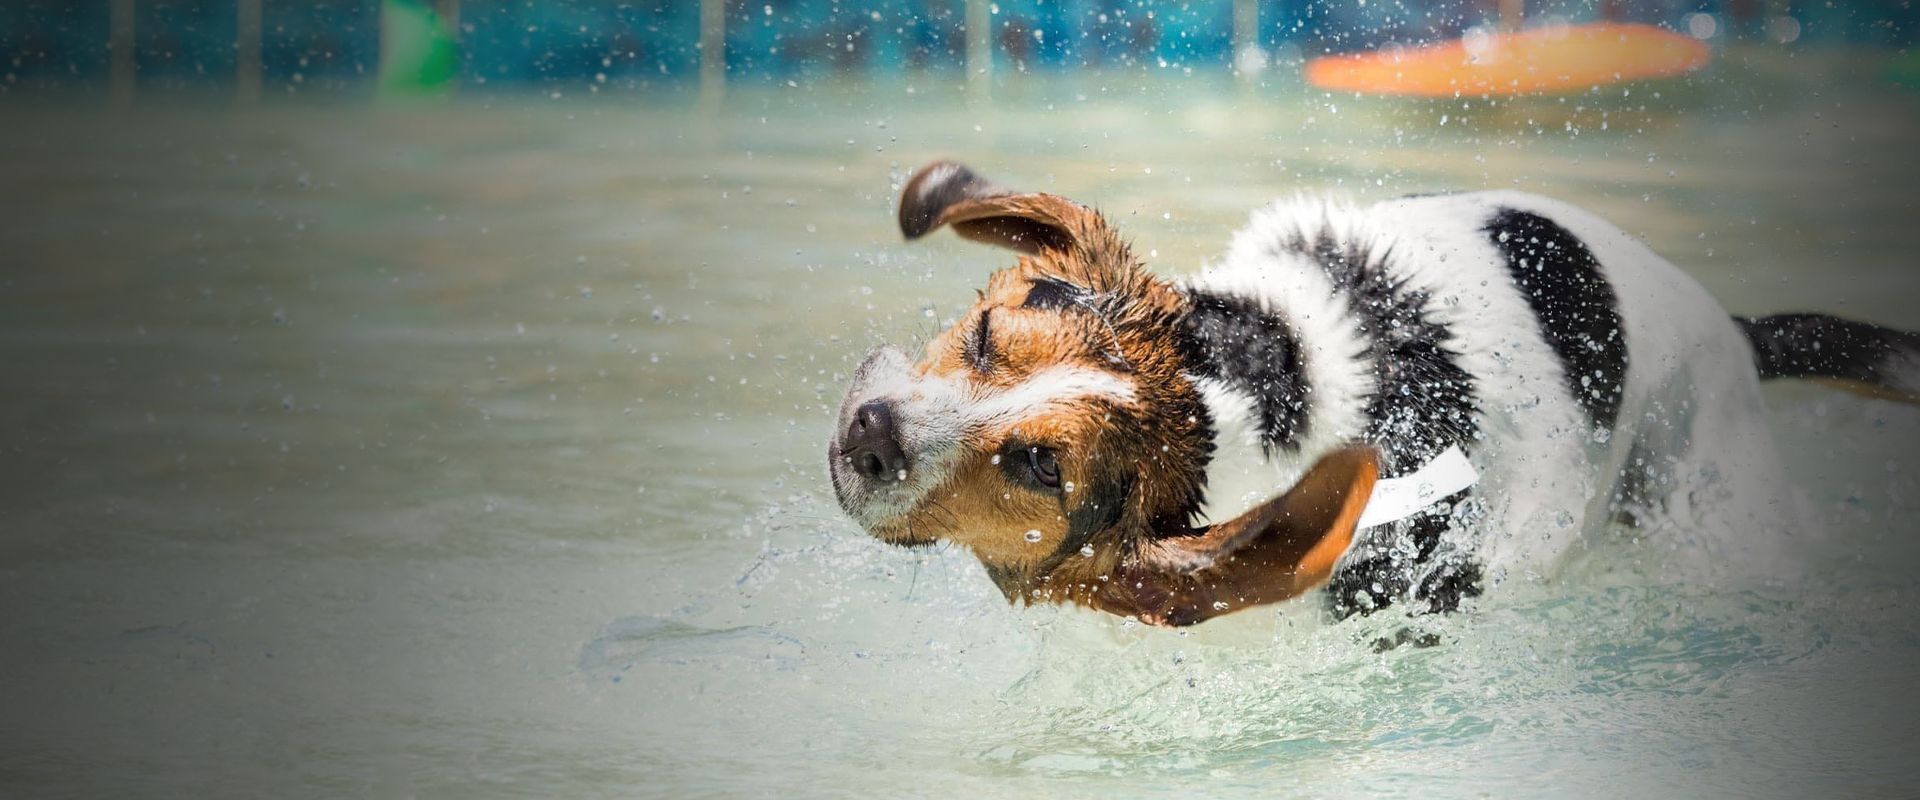 dog shaking in a pool